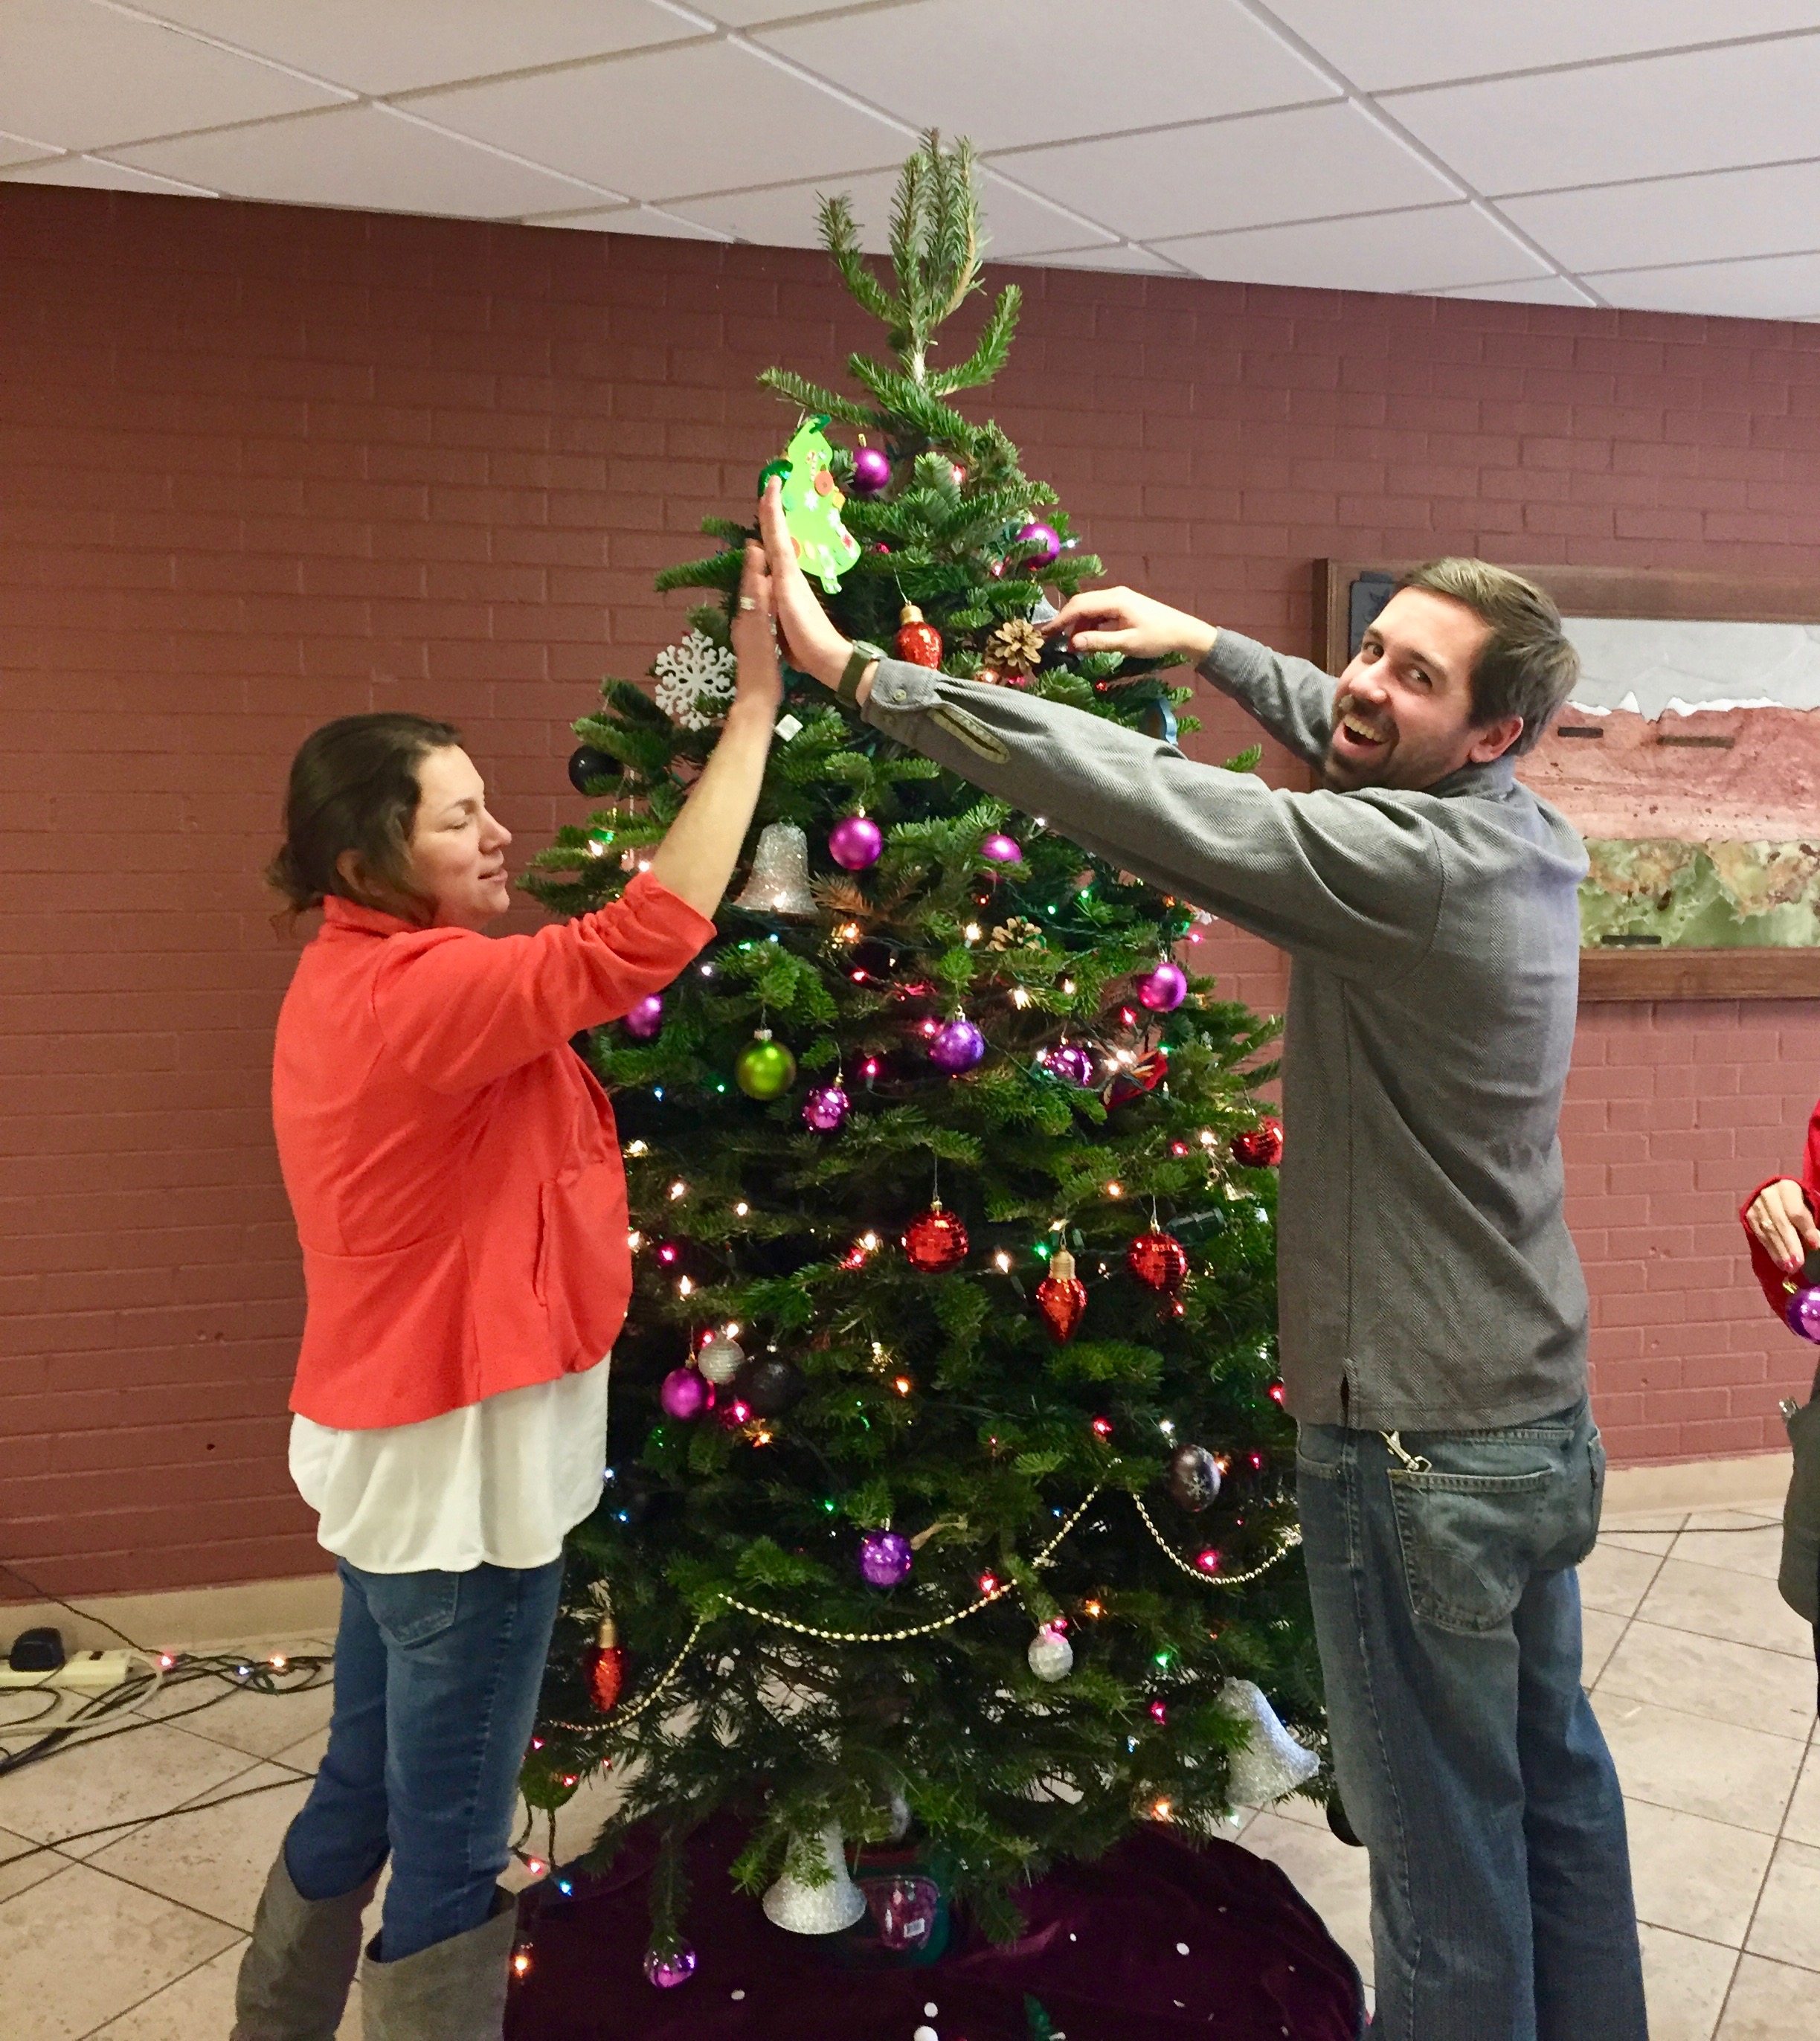 Shop Instructor Chris and Home Management Instructor Delfina high fiving in front of the tree